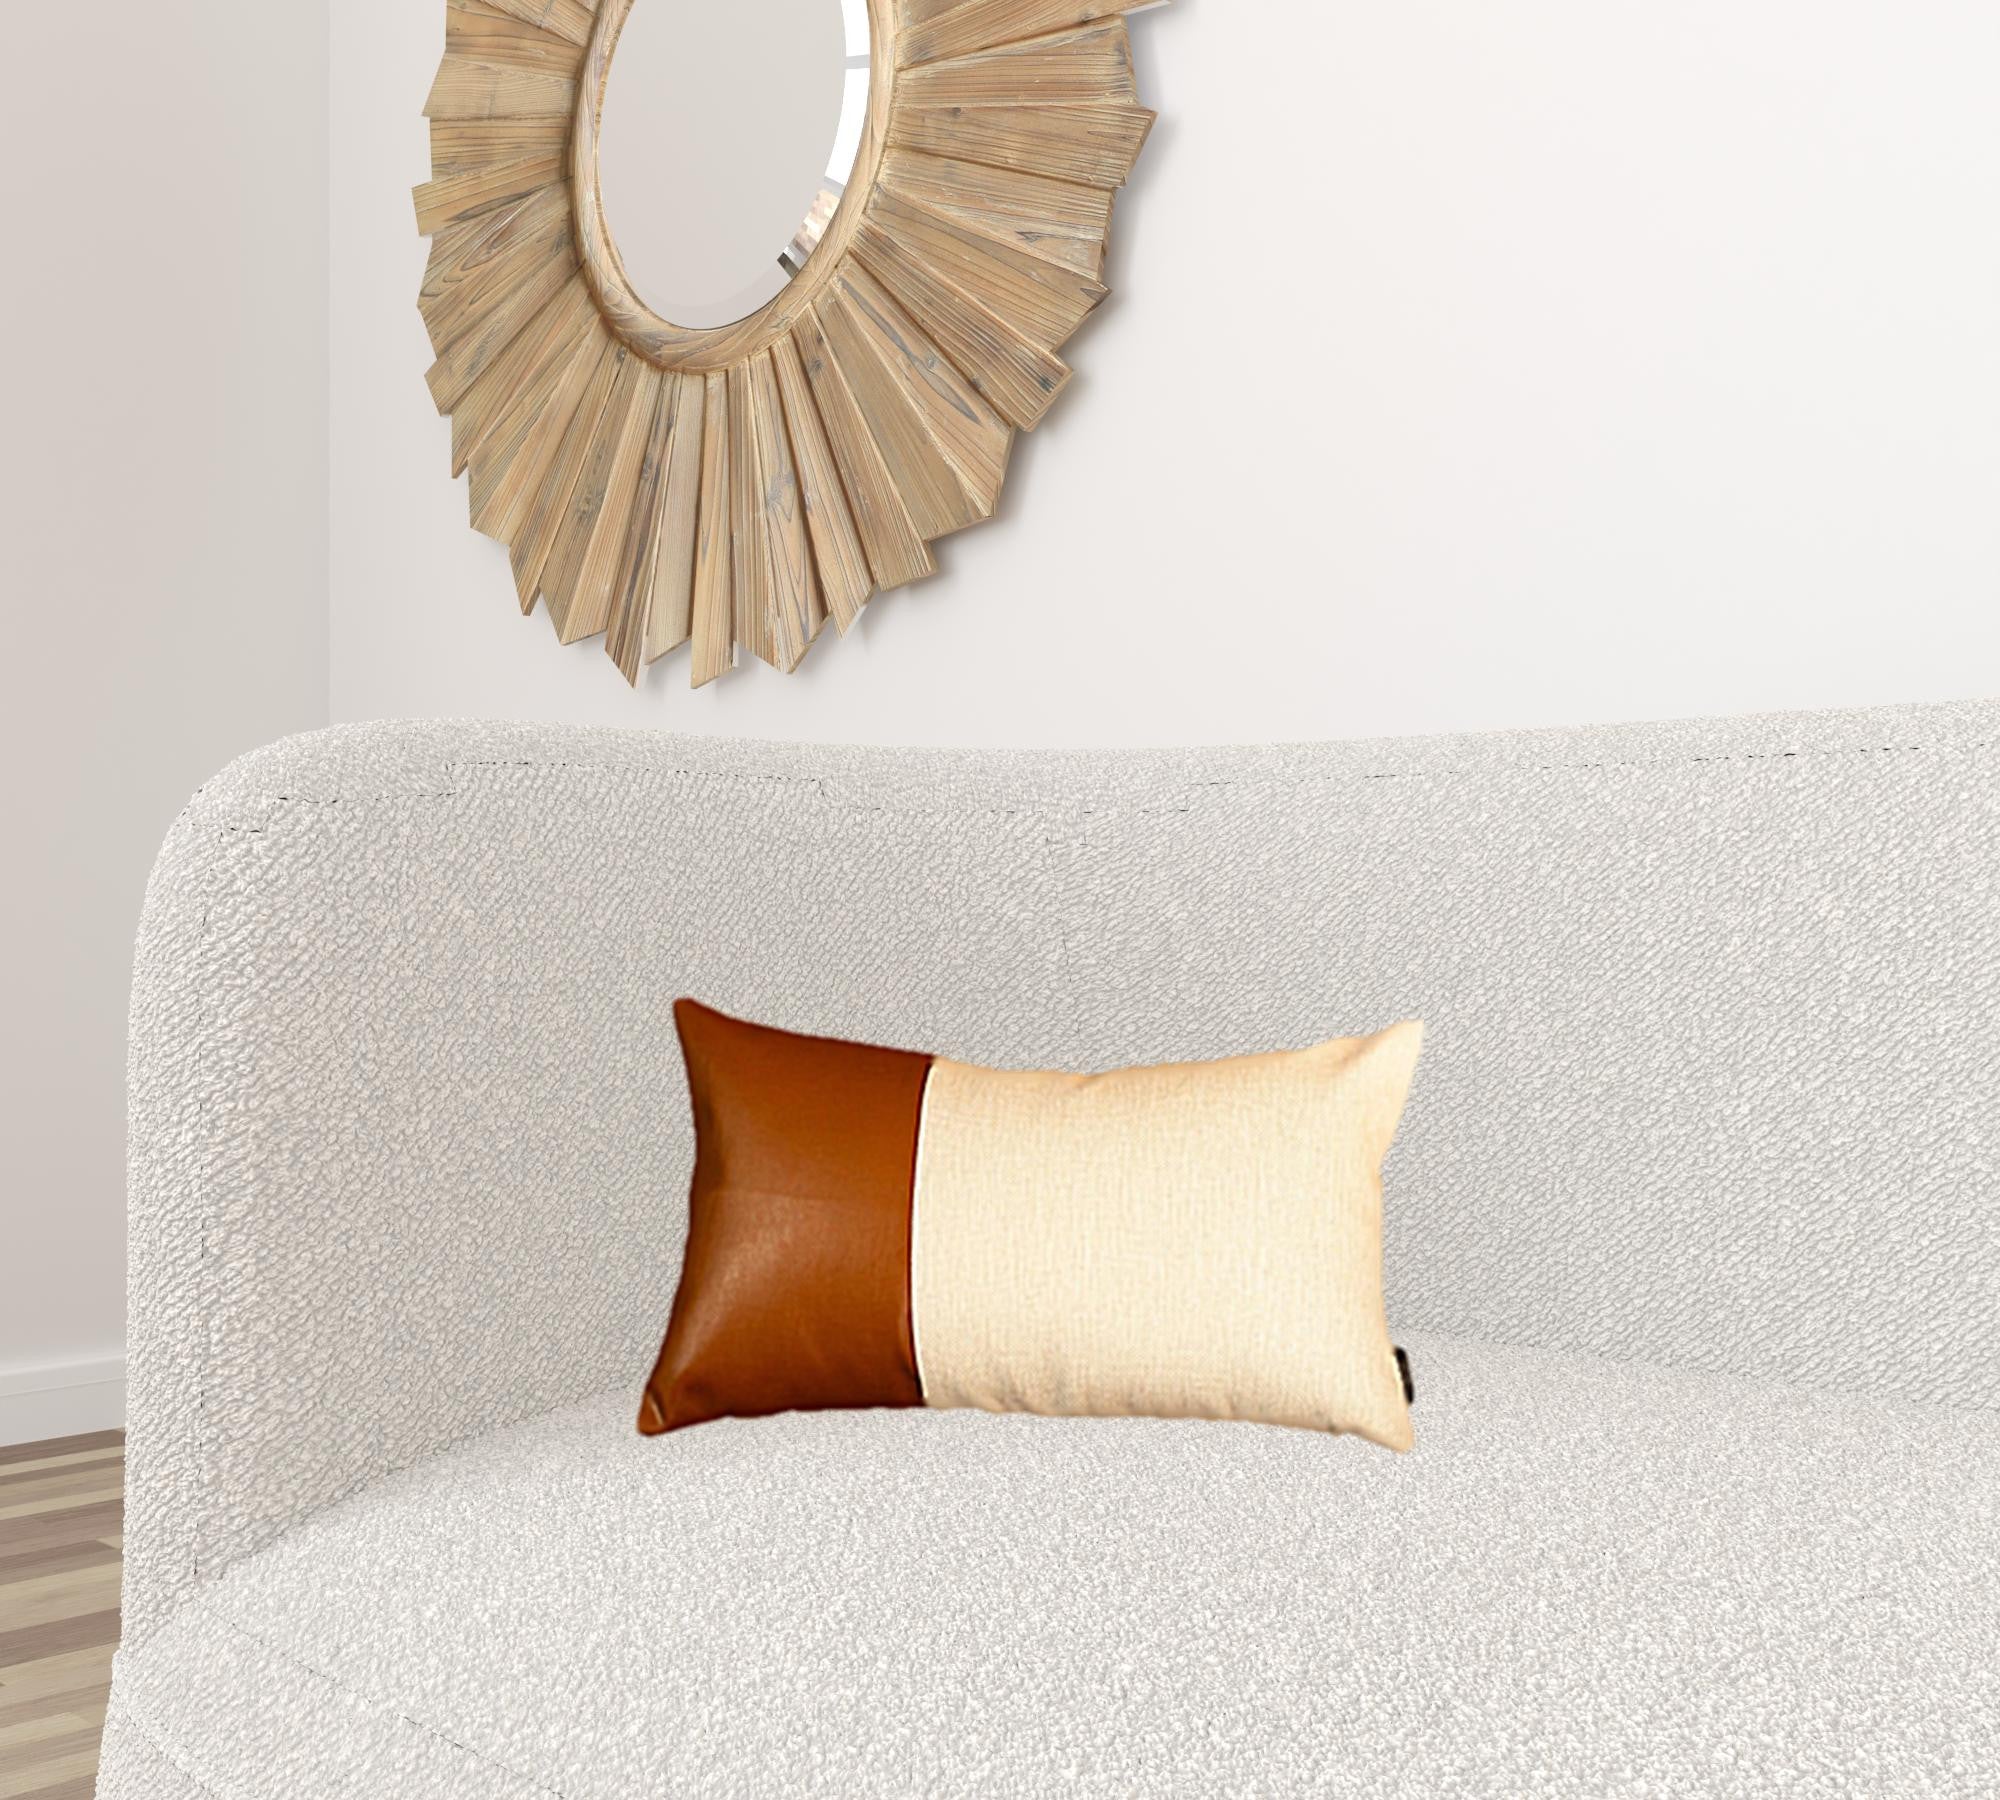 White And Brown Faux Leather Lumbar Decorative Pillow Cover